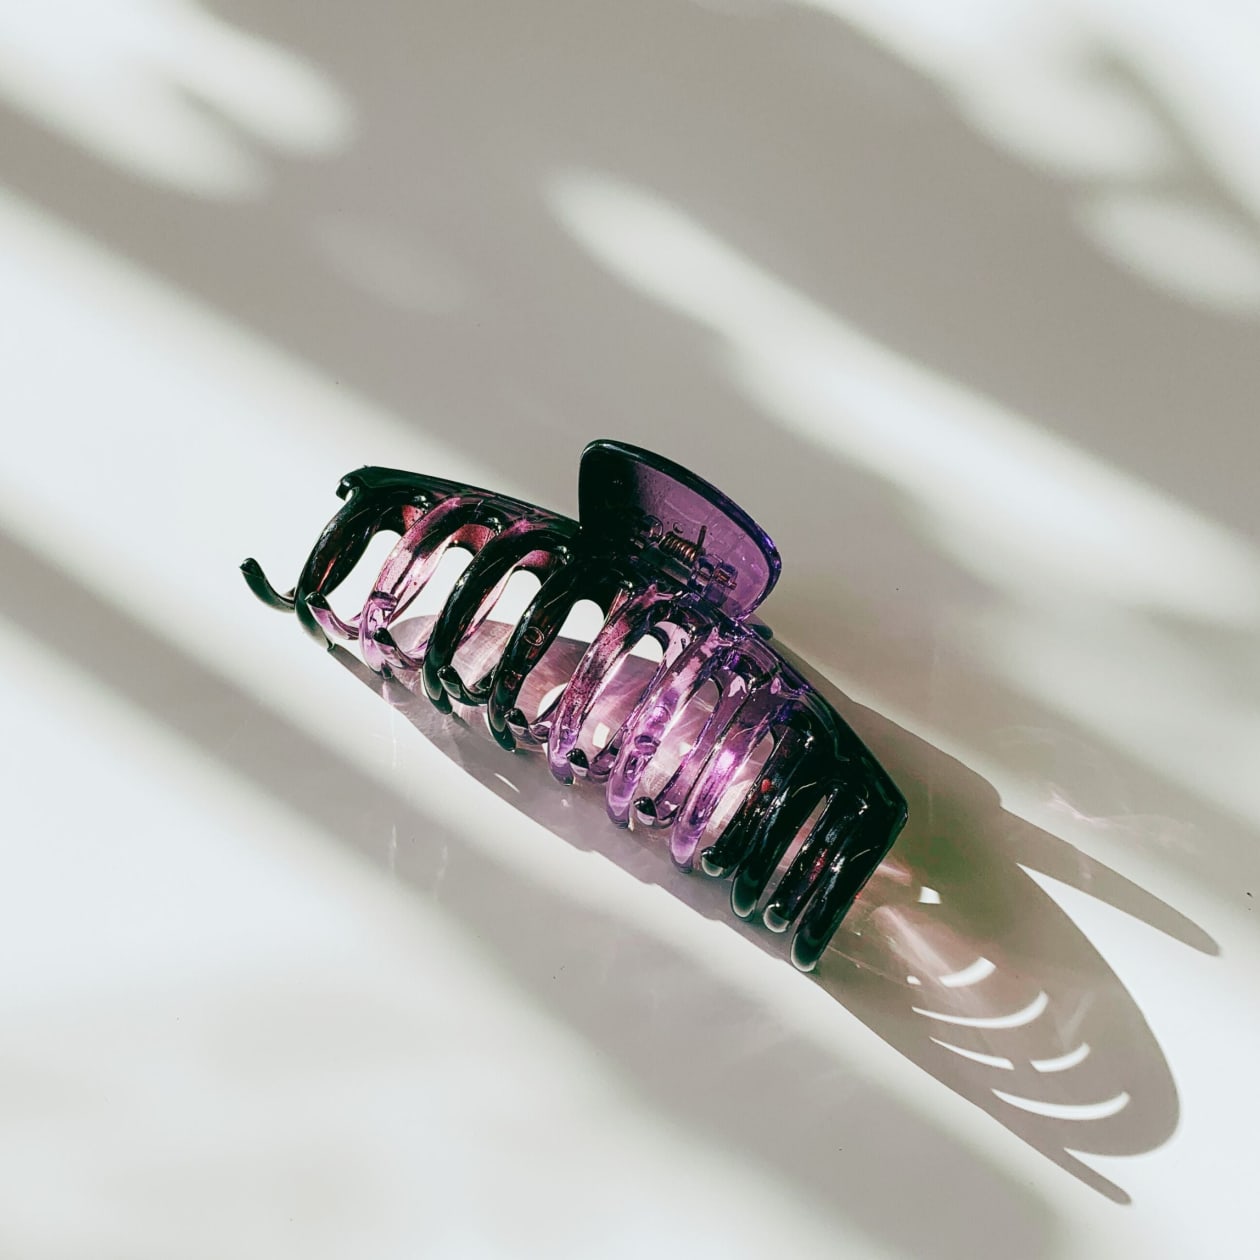 Velvet Claws Hair Clip | The Lobster in Translucent Ambient Purple | Claw Clip in Velvet Travel Bag